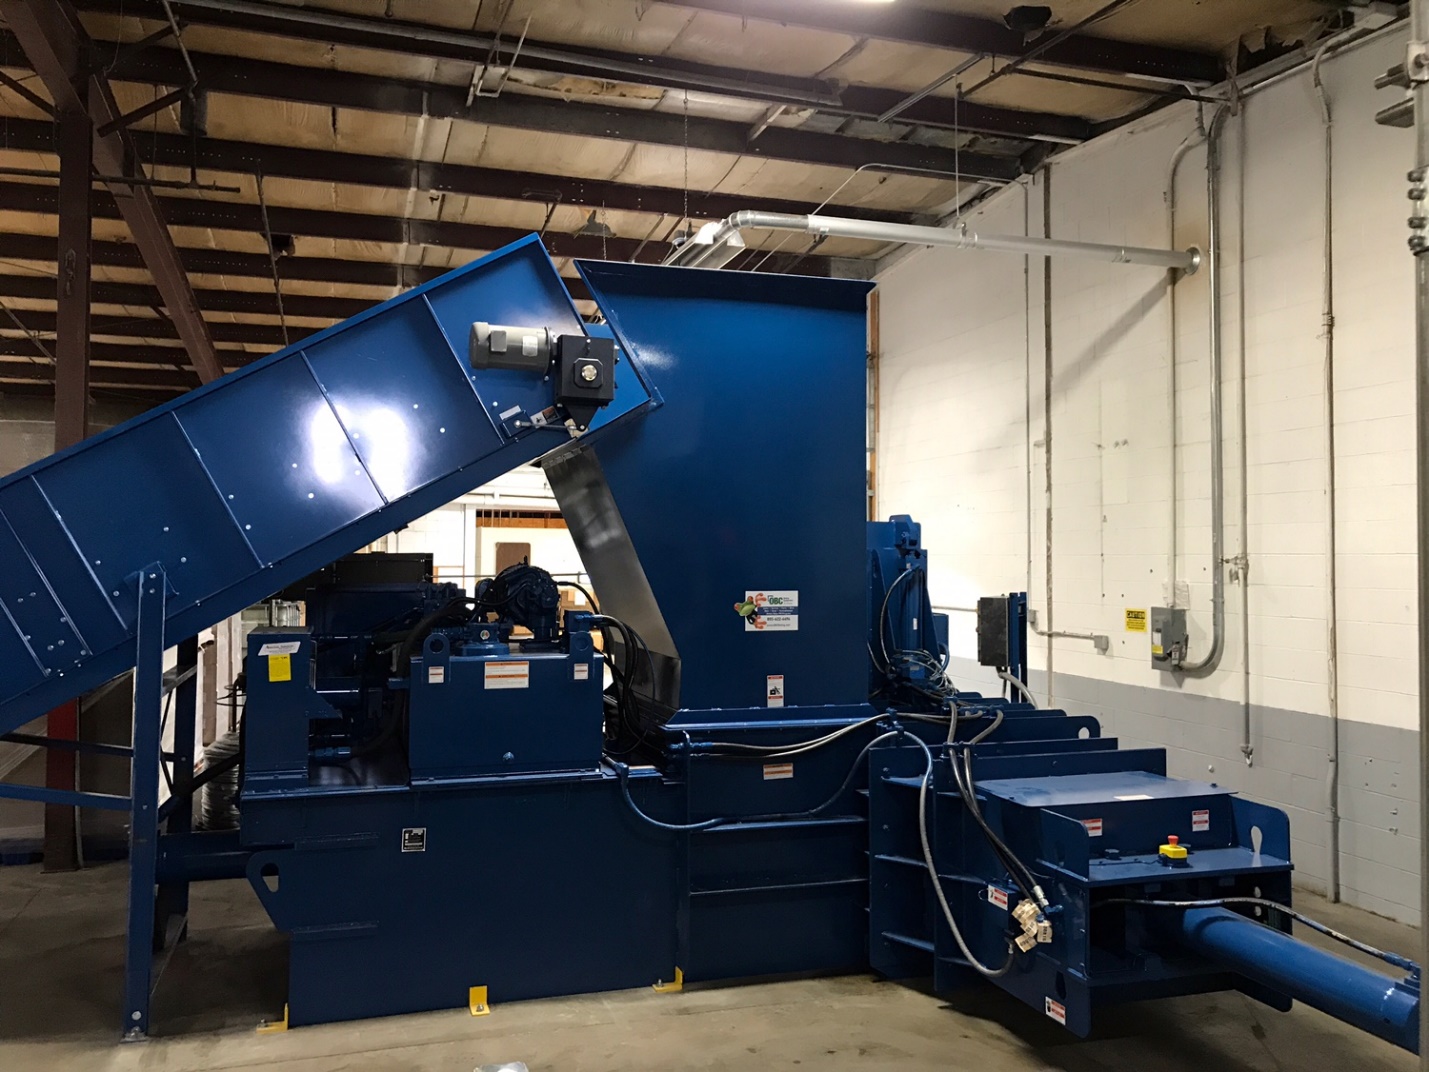 A large blue machine in a warehouse room.